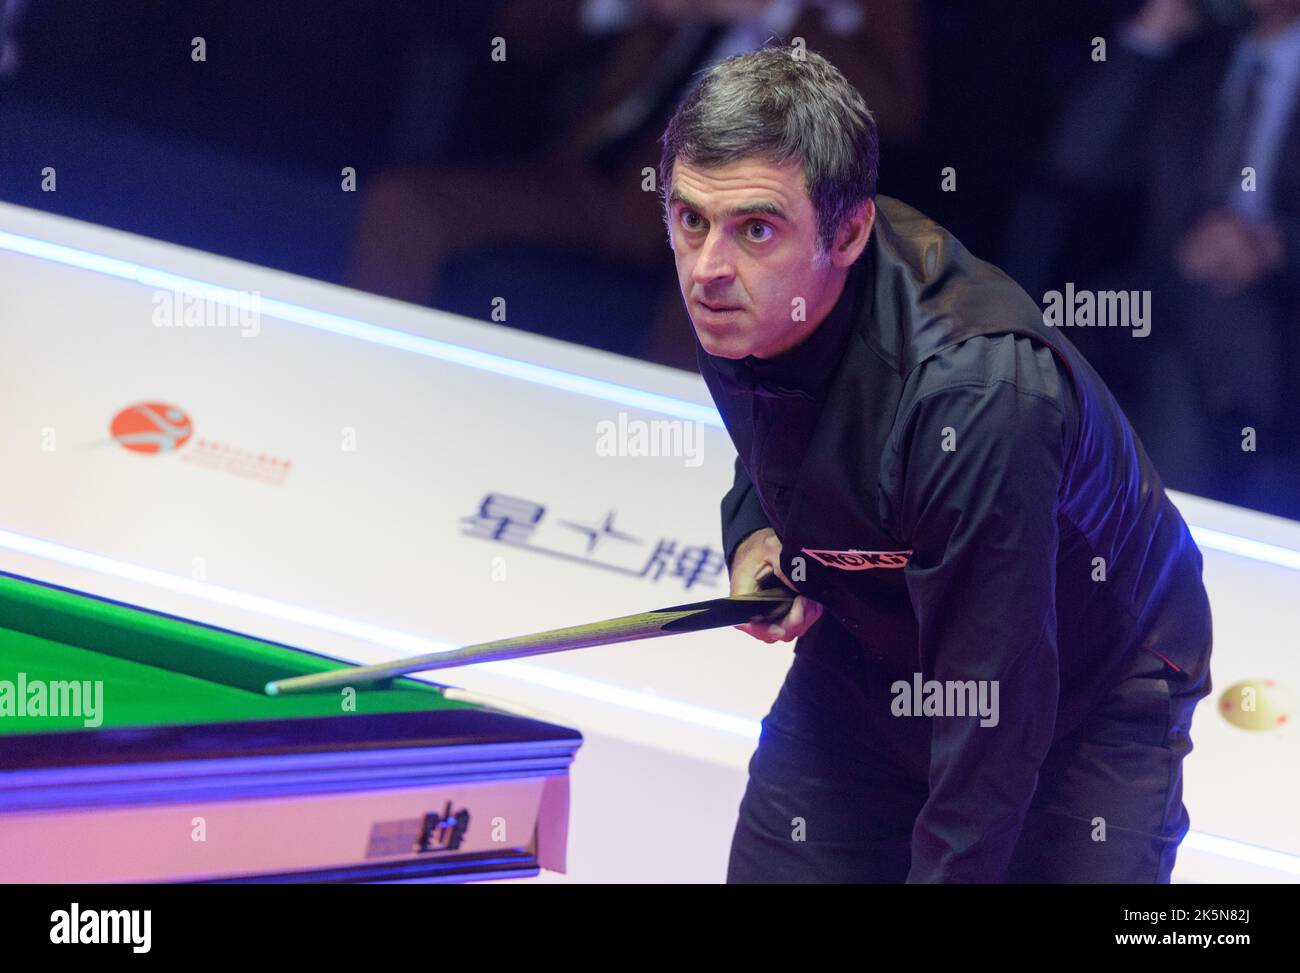 Hong Kong, China. 09th Oct, 2022. Ronnie O'Sullivan and Marco Fu. World No1 Ronnie O'Sullivan from England takes on local Hong Kong champion Marco Fu in the final of the Hong Kong Masters Snooker 2022. Alamy Live Sport/Jayne Russell Credit: Jayne Russell/Alamy Live News Stock Photo